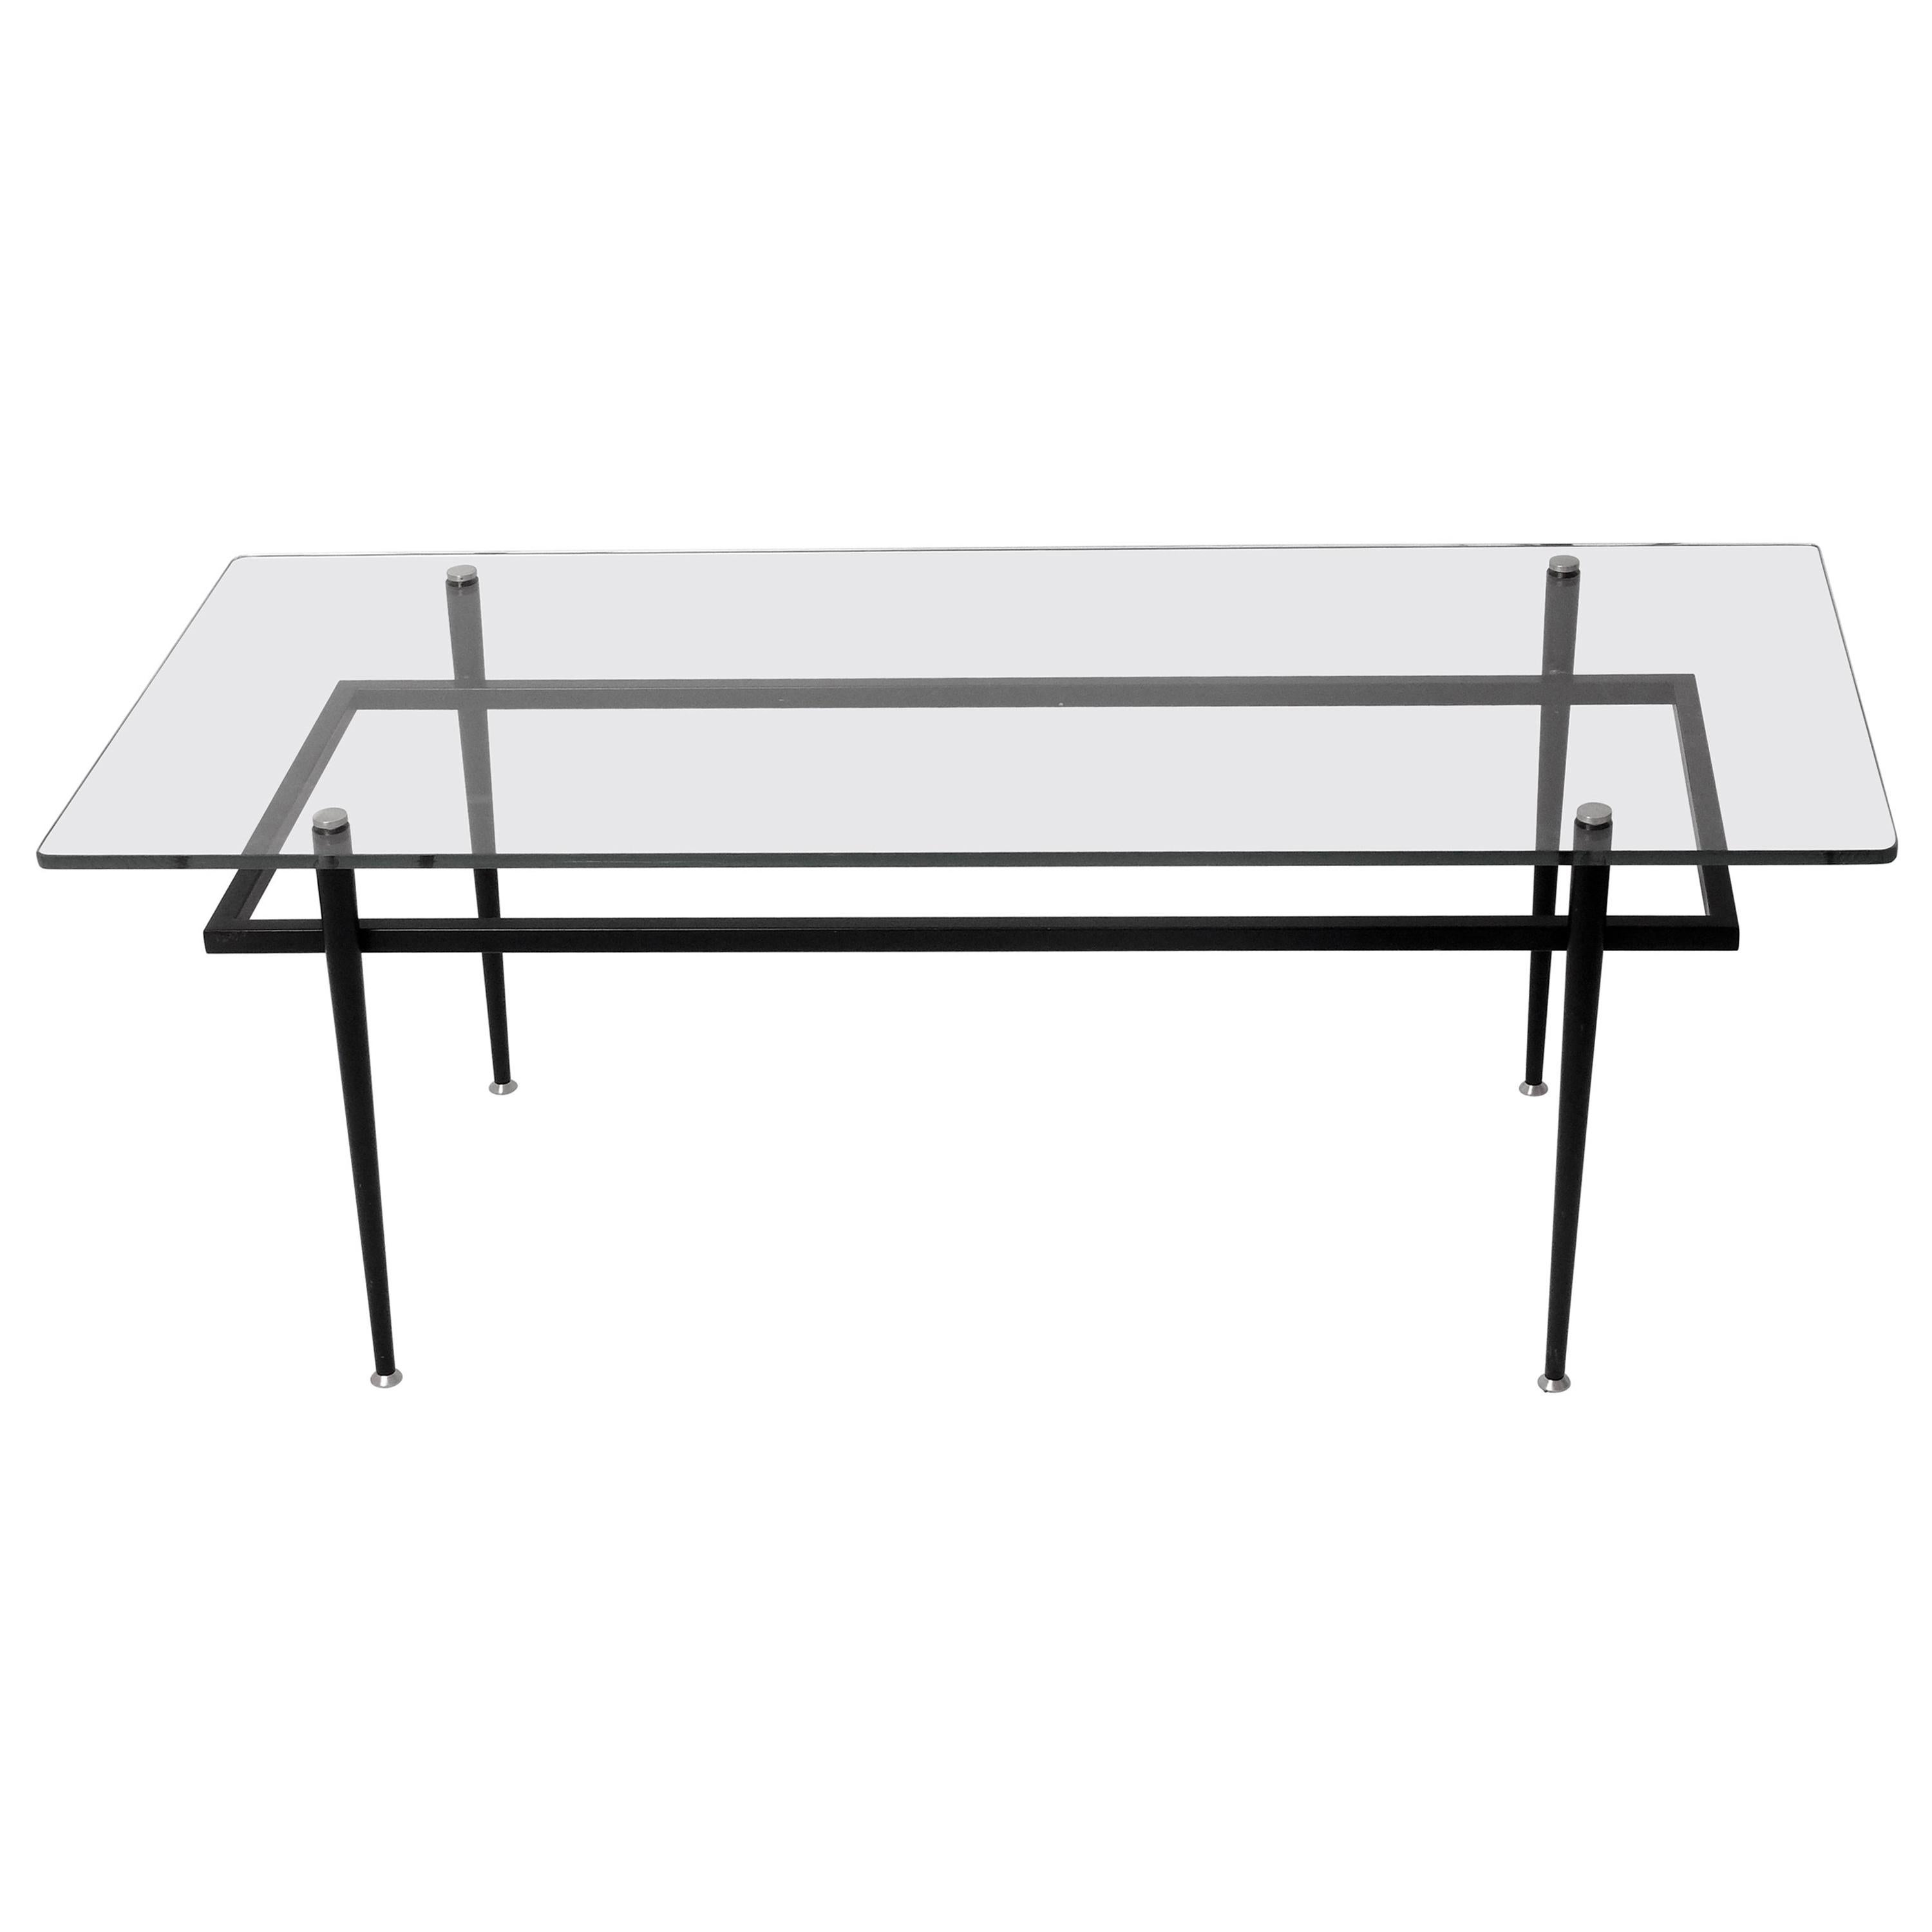 Roger le Bihan French Coffee Table for Airborne, Minimalist before Pawson